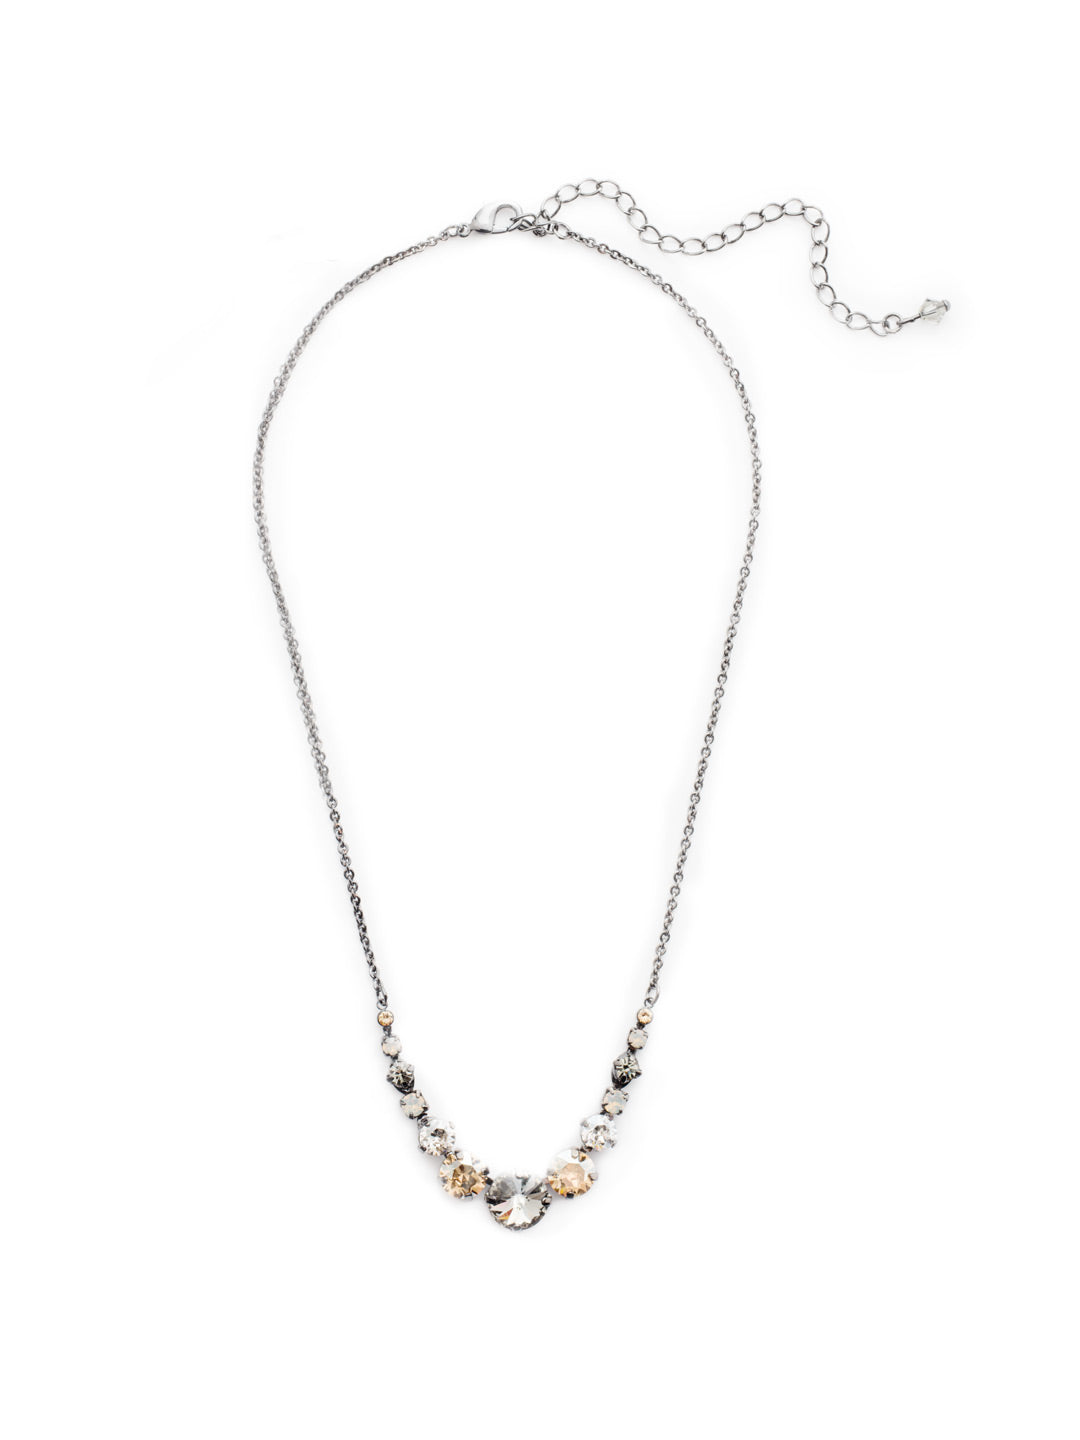 London Tennis Necklace - NCQ14GMGNS - A long, simple chain paired with gorgeous round stones is exactly what every girl needs to dress things up. This round stone necklace is perfect for layering, or to just wear alone. Let the simple sparkle take over. From Sorrelli's Golden Shadow collection in our Gun Metal finish.